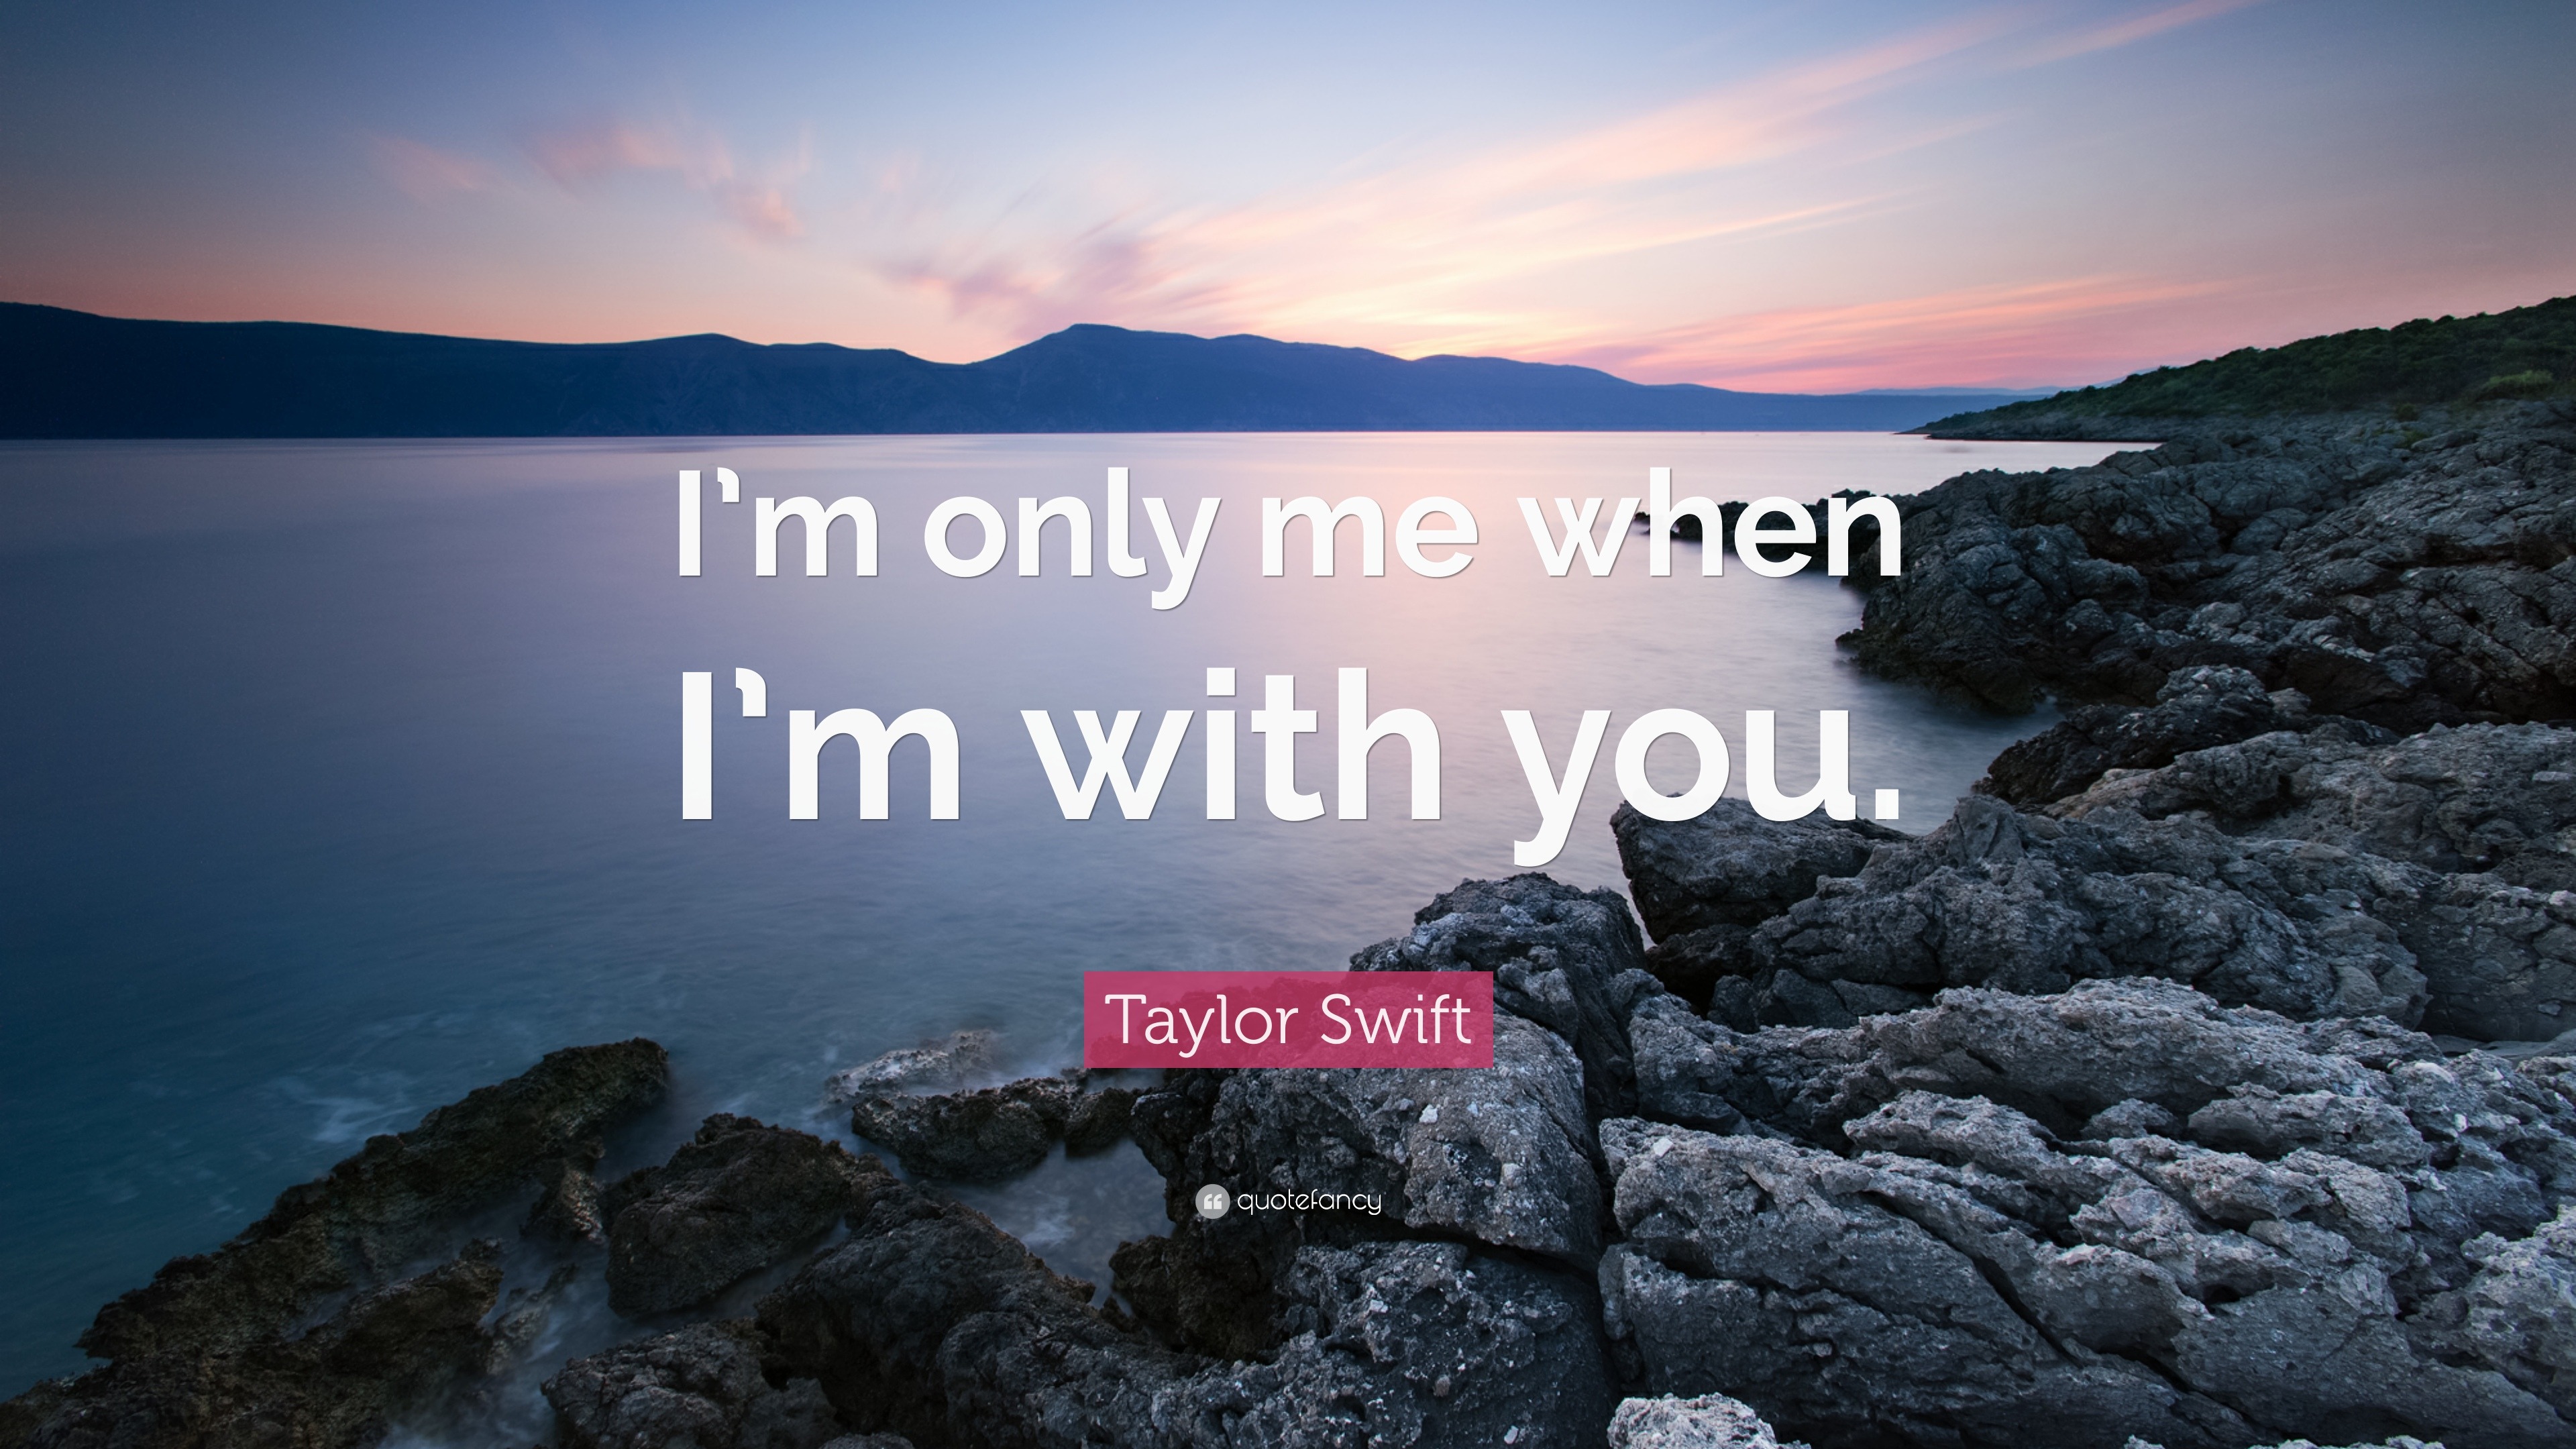 Taylor Swift Quotes 500 Wallpapers Quotefancy